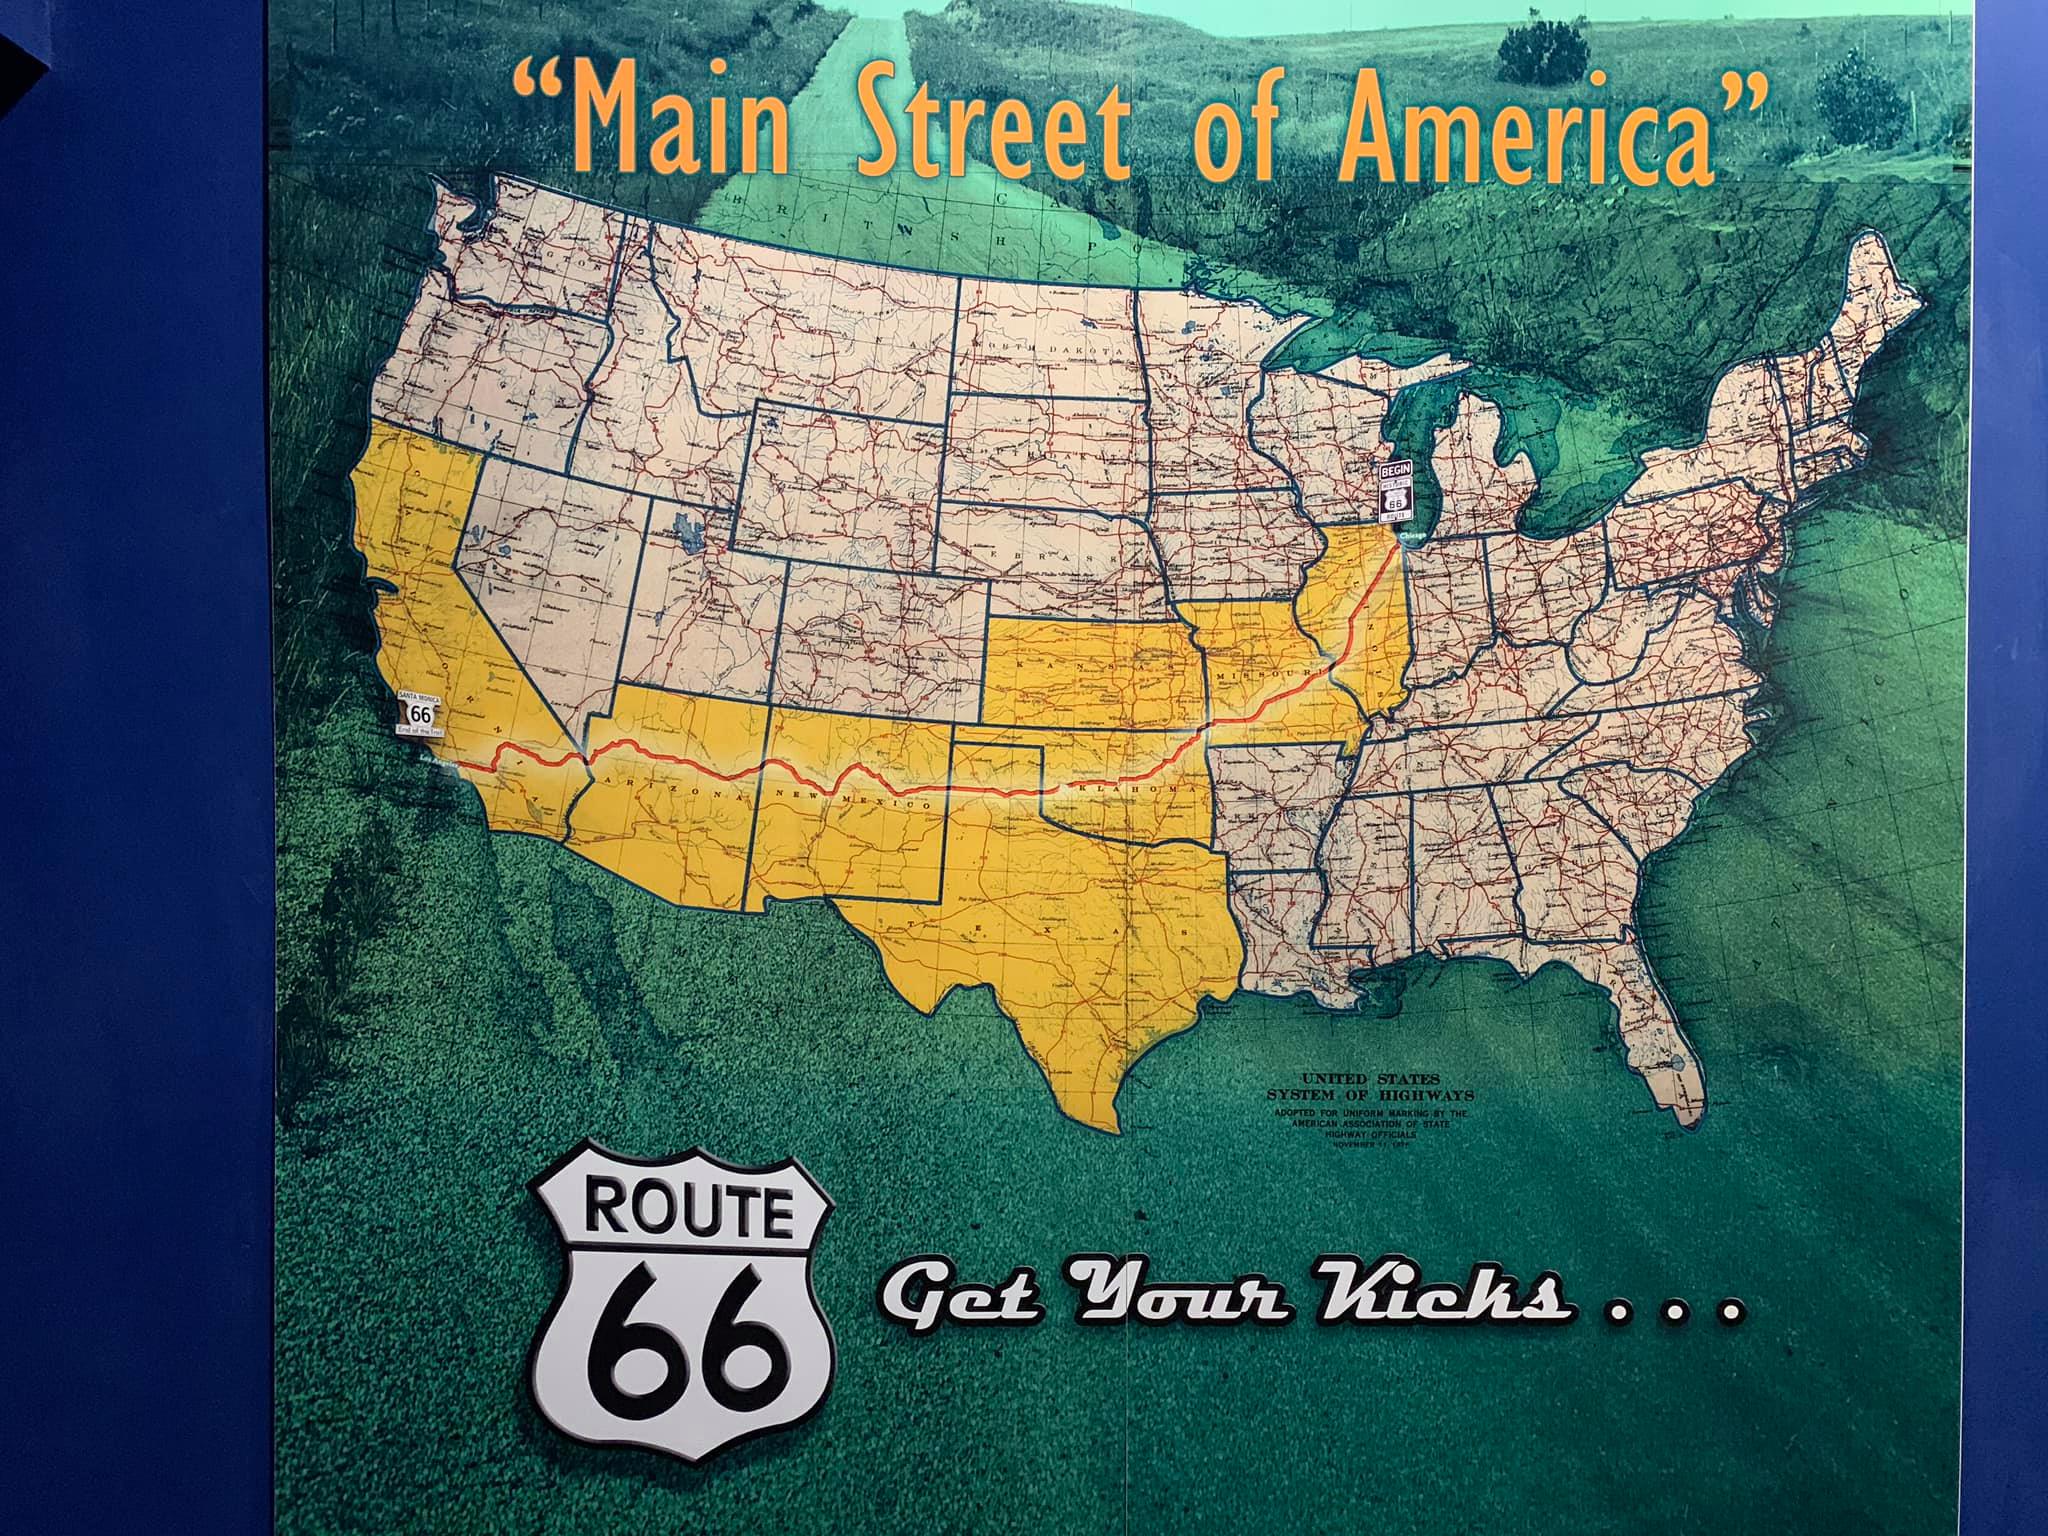 Route 66 Museum on X: Visit the Route 66 Museum in Clinton, OK during  Spring Break and learn more about Route 66, Main Street of America.   / X